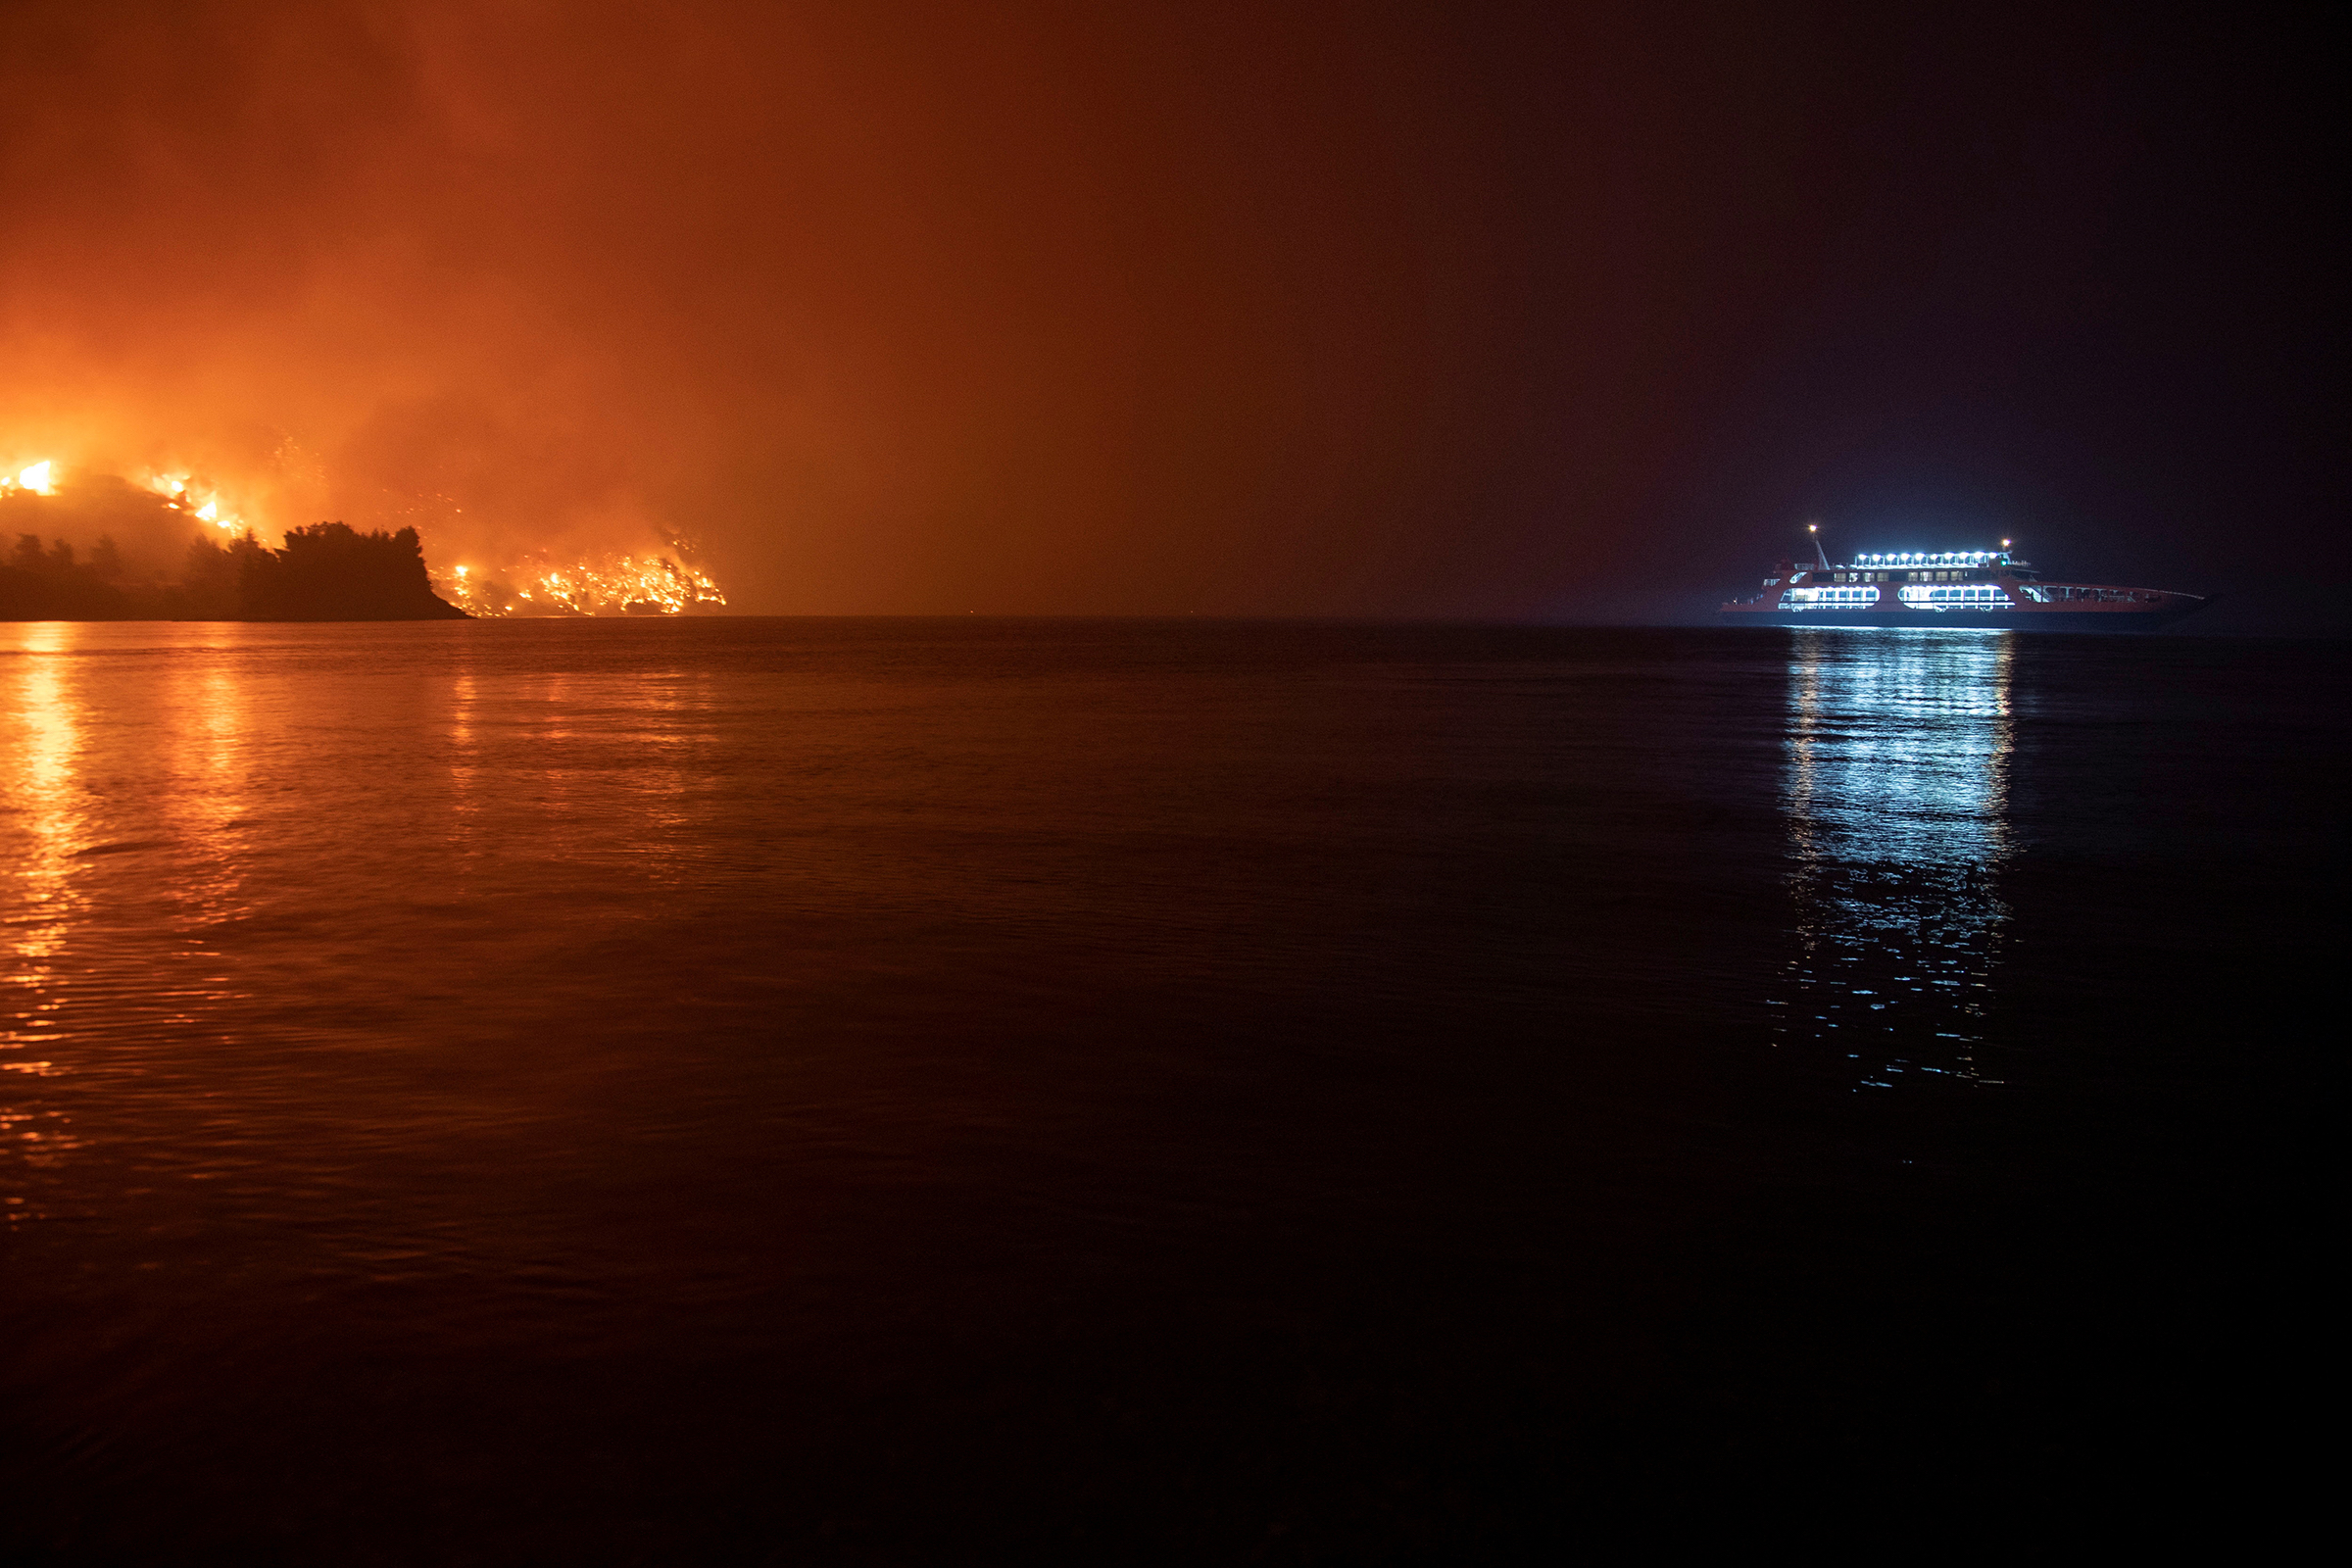 People are evacuated on a ferry as a wildfire burns in the Greek village of Limni, on the island of Evia, on Aug. 6. With other escape routes blocked by flames, residents and tourists had been urged to flee by boat.